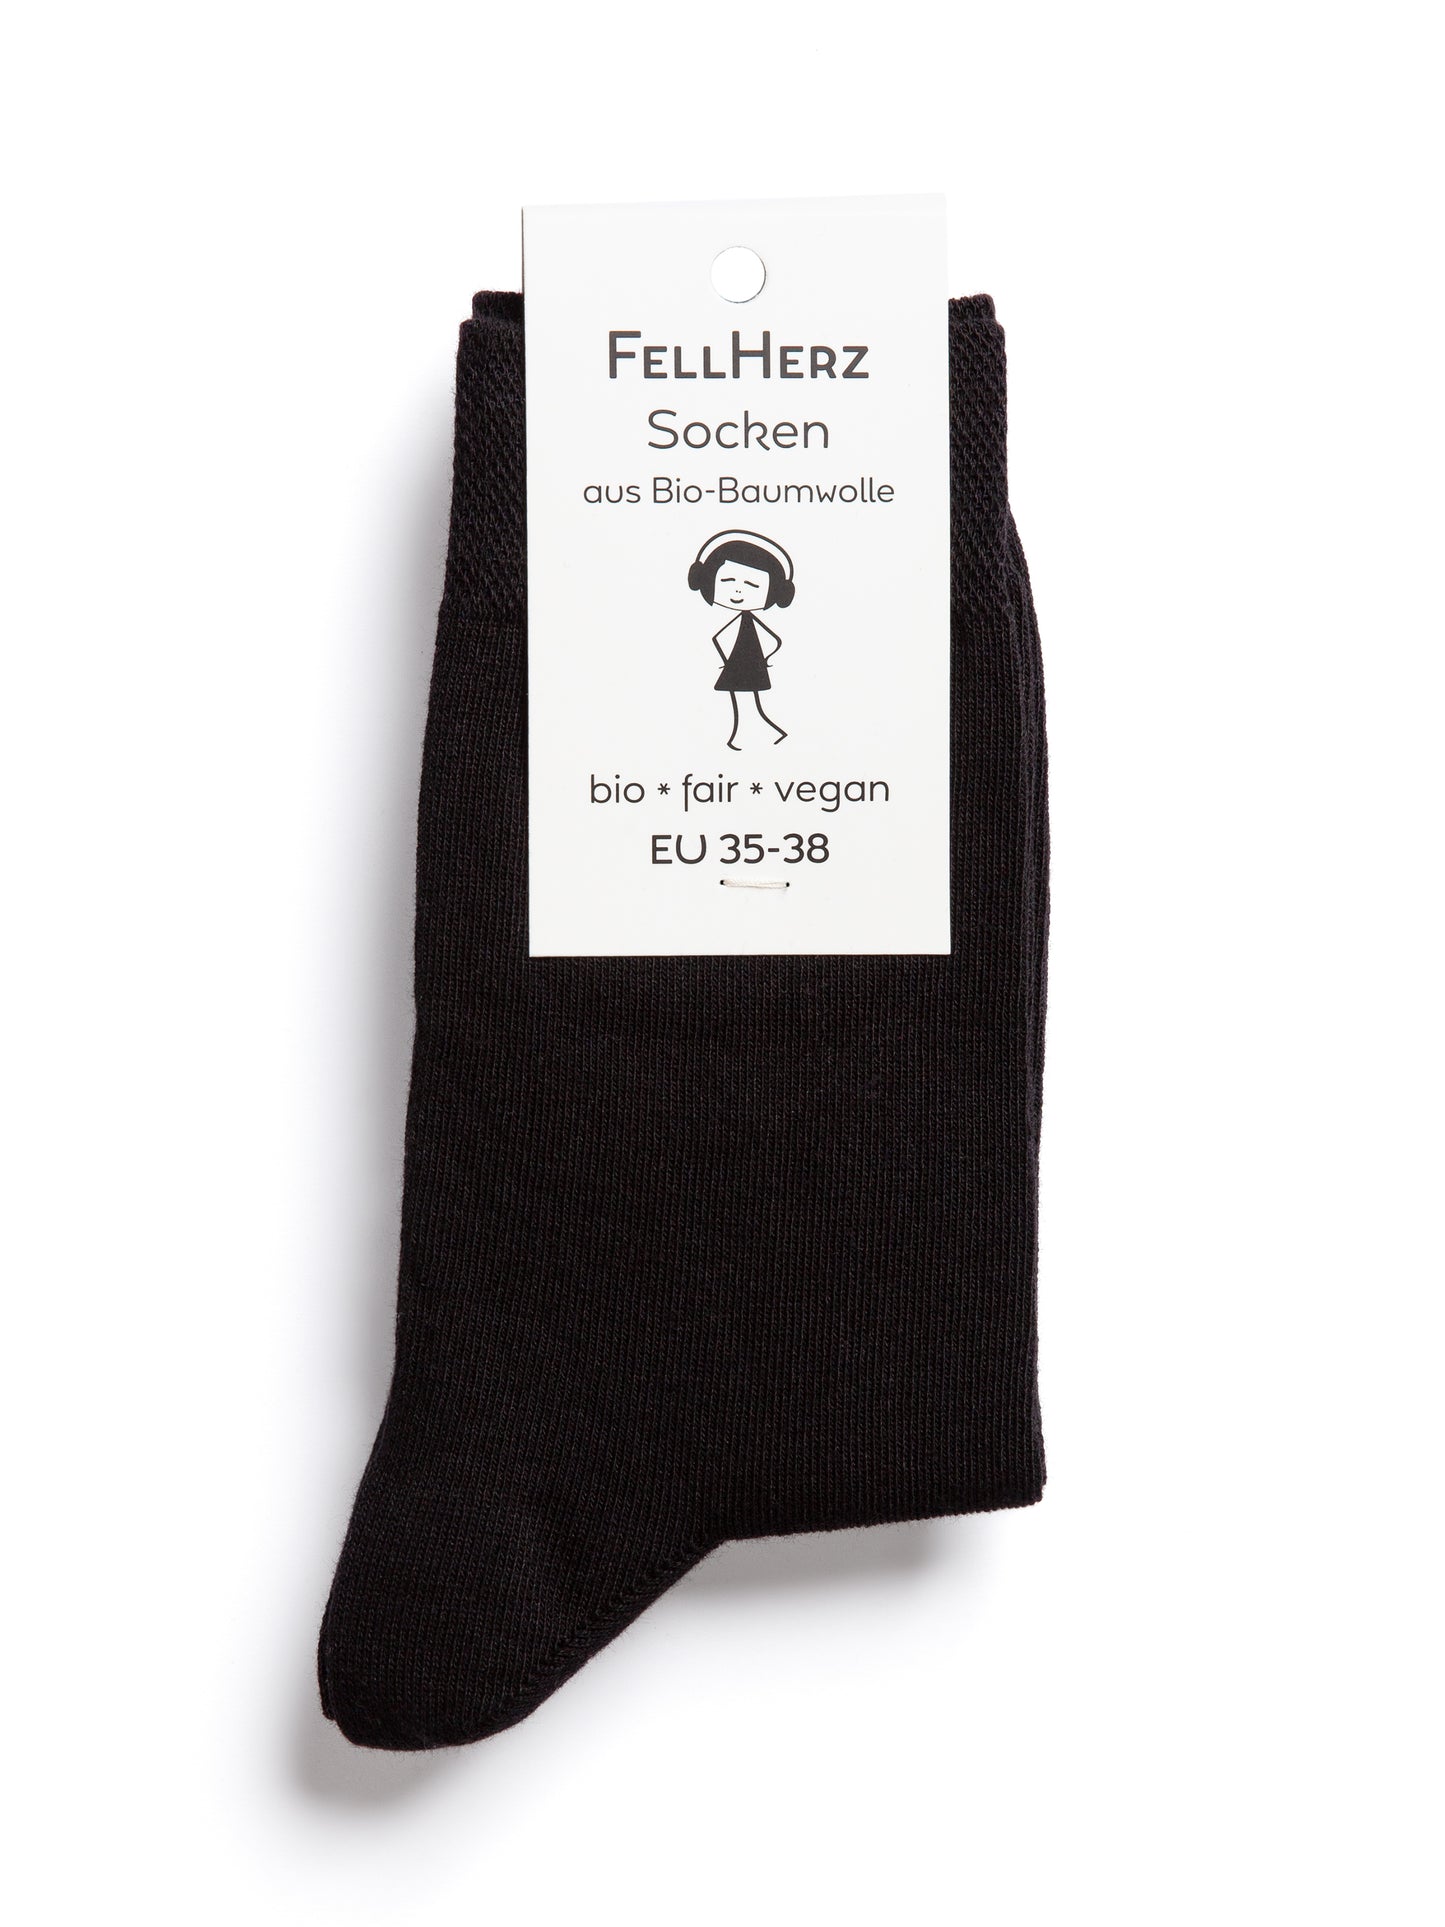 Pack of 3 socks with organic cotton black